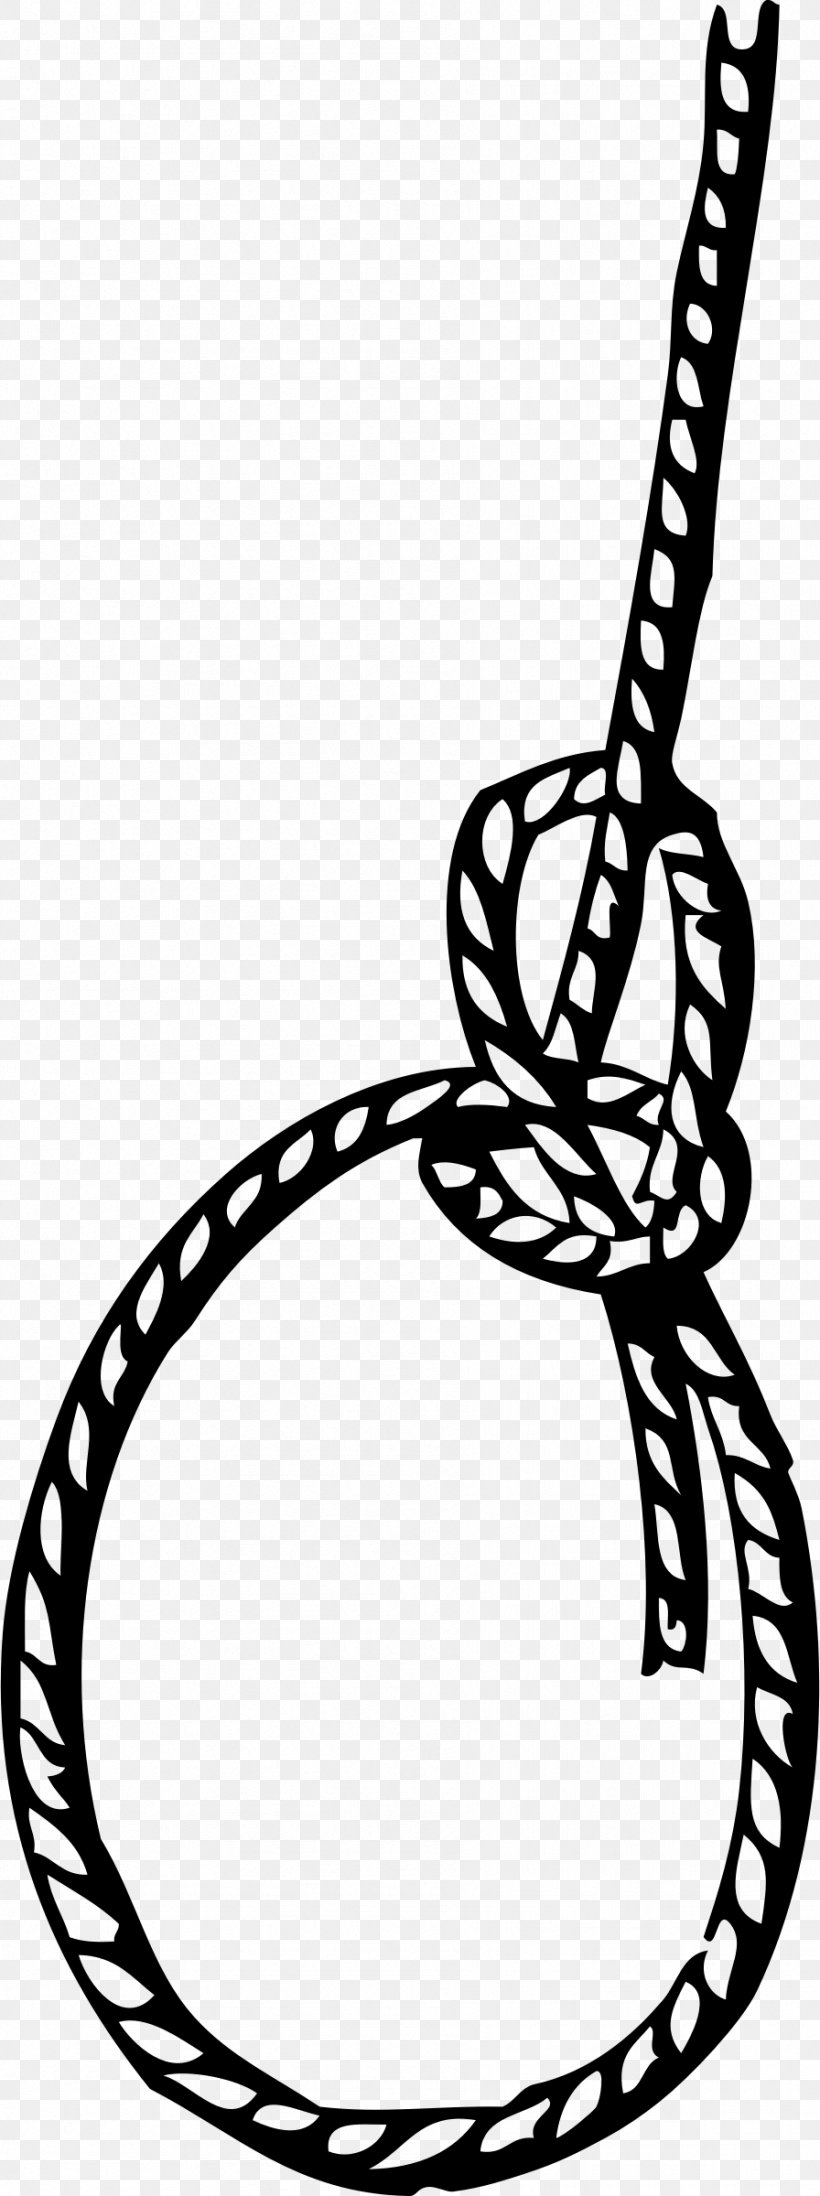 Rope Knot Clip Art, PNG, 896x2400px, Rope, Black, Black And White, Knot, Line Art Download Free